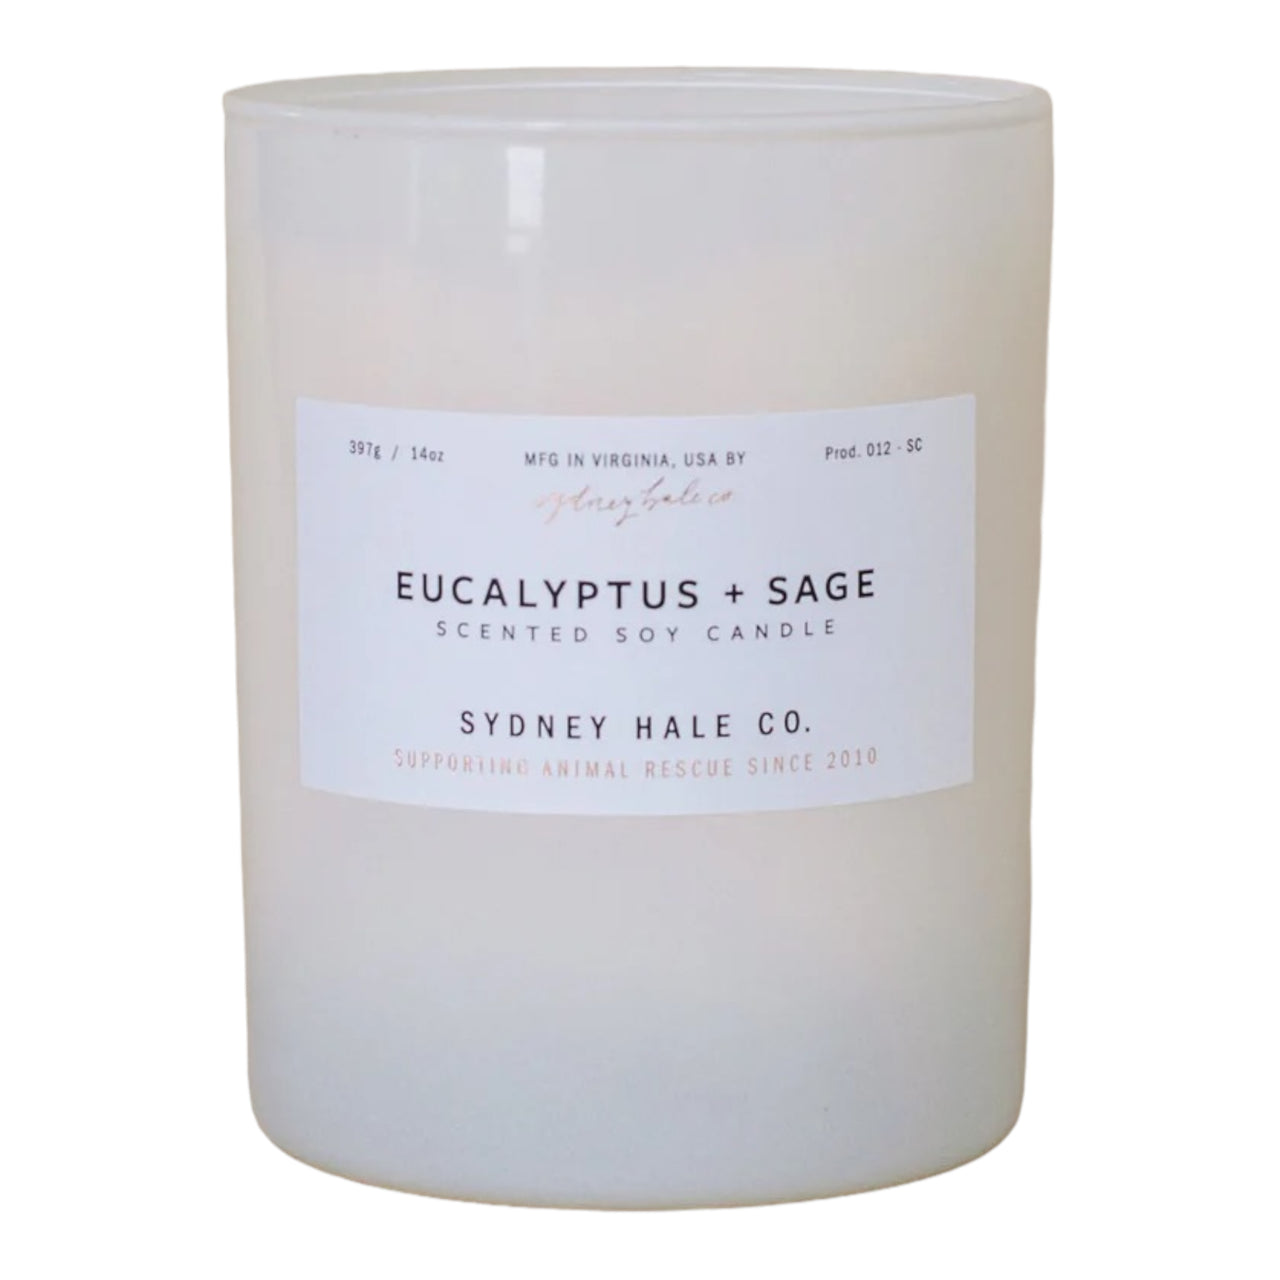 Eucalyptus + Sage Scented Soy Candle